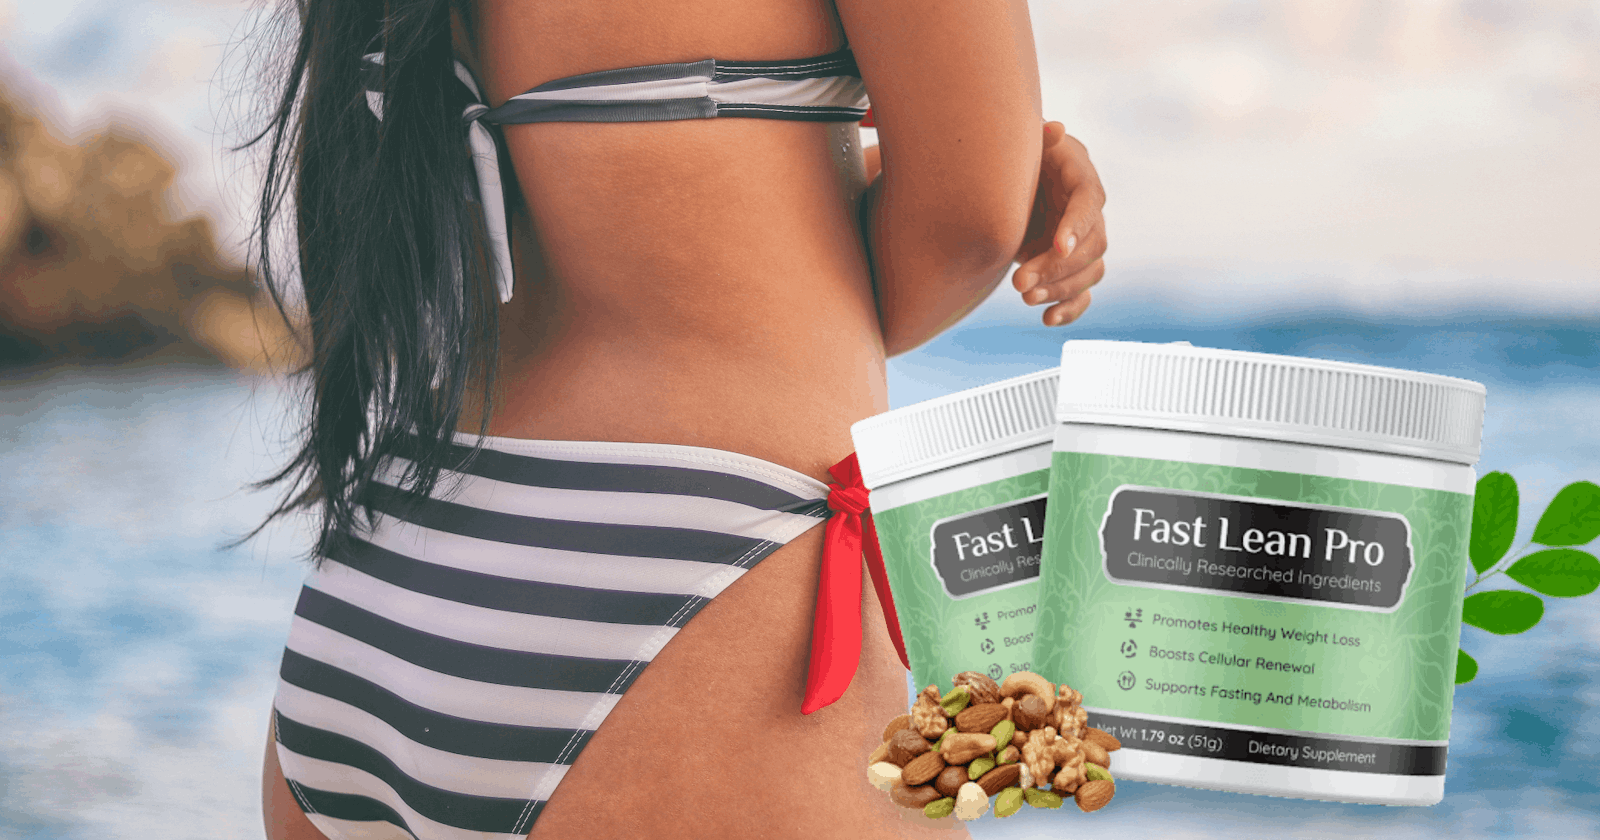 Fast Lean Pro Weight Loss Powder